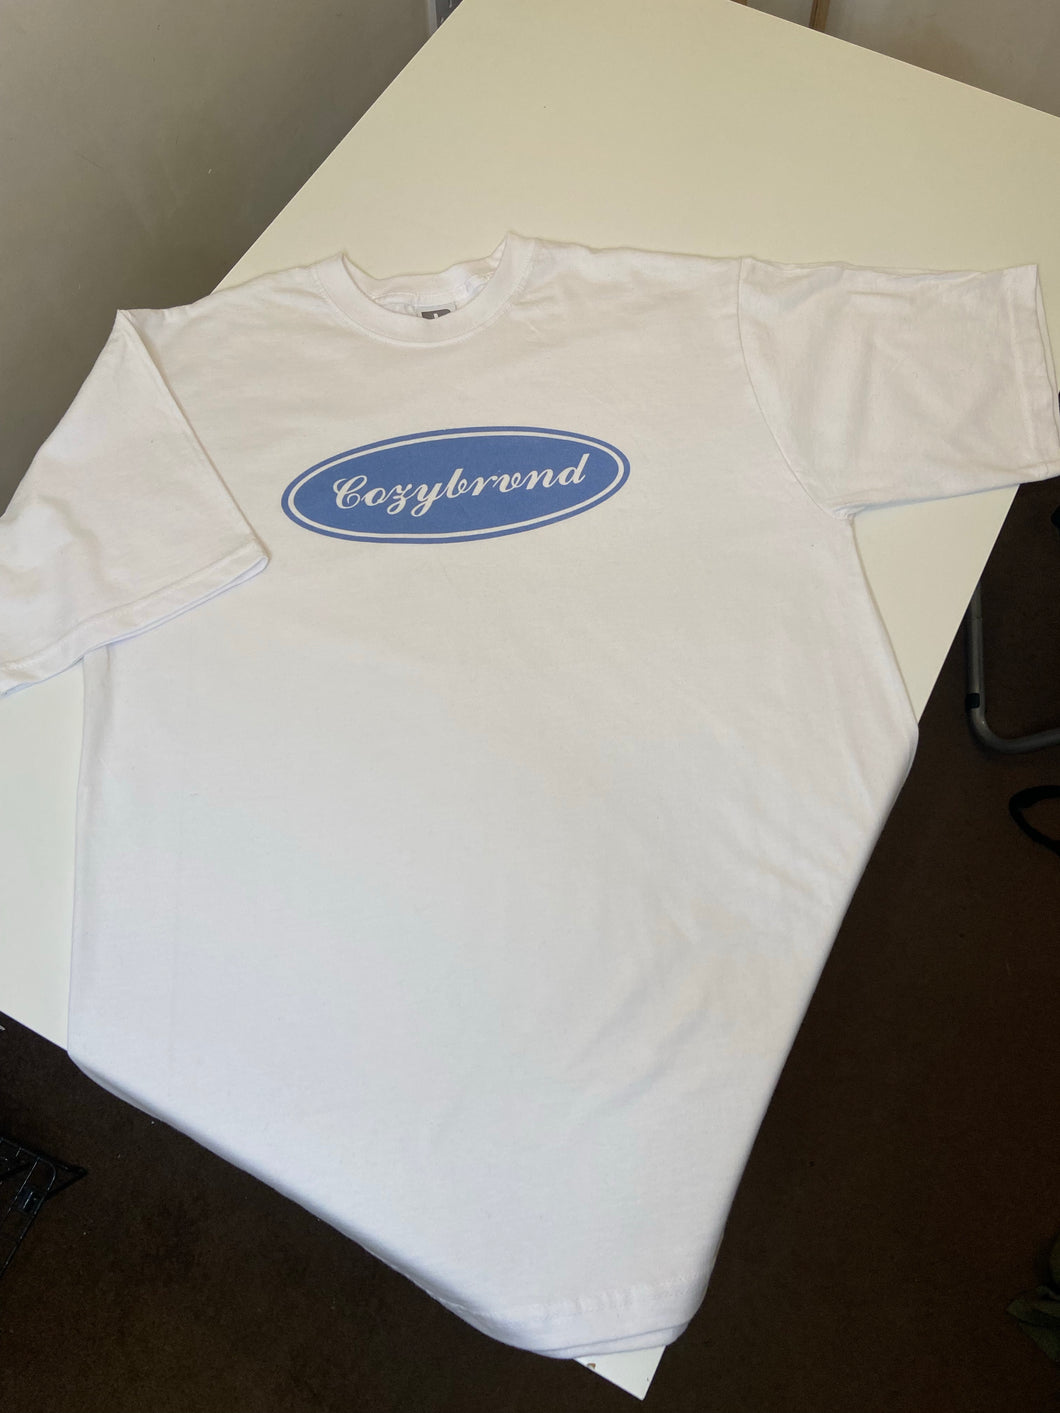 FORD TEE